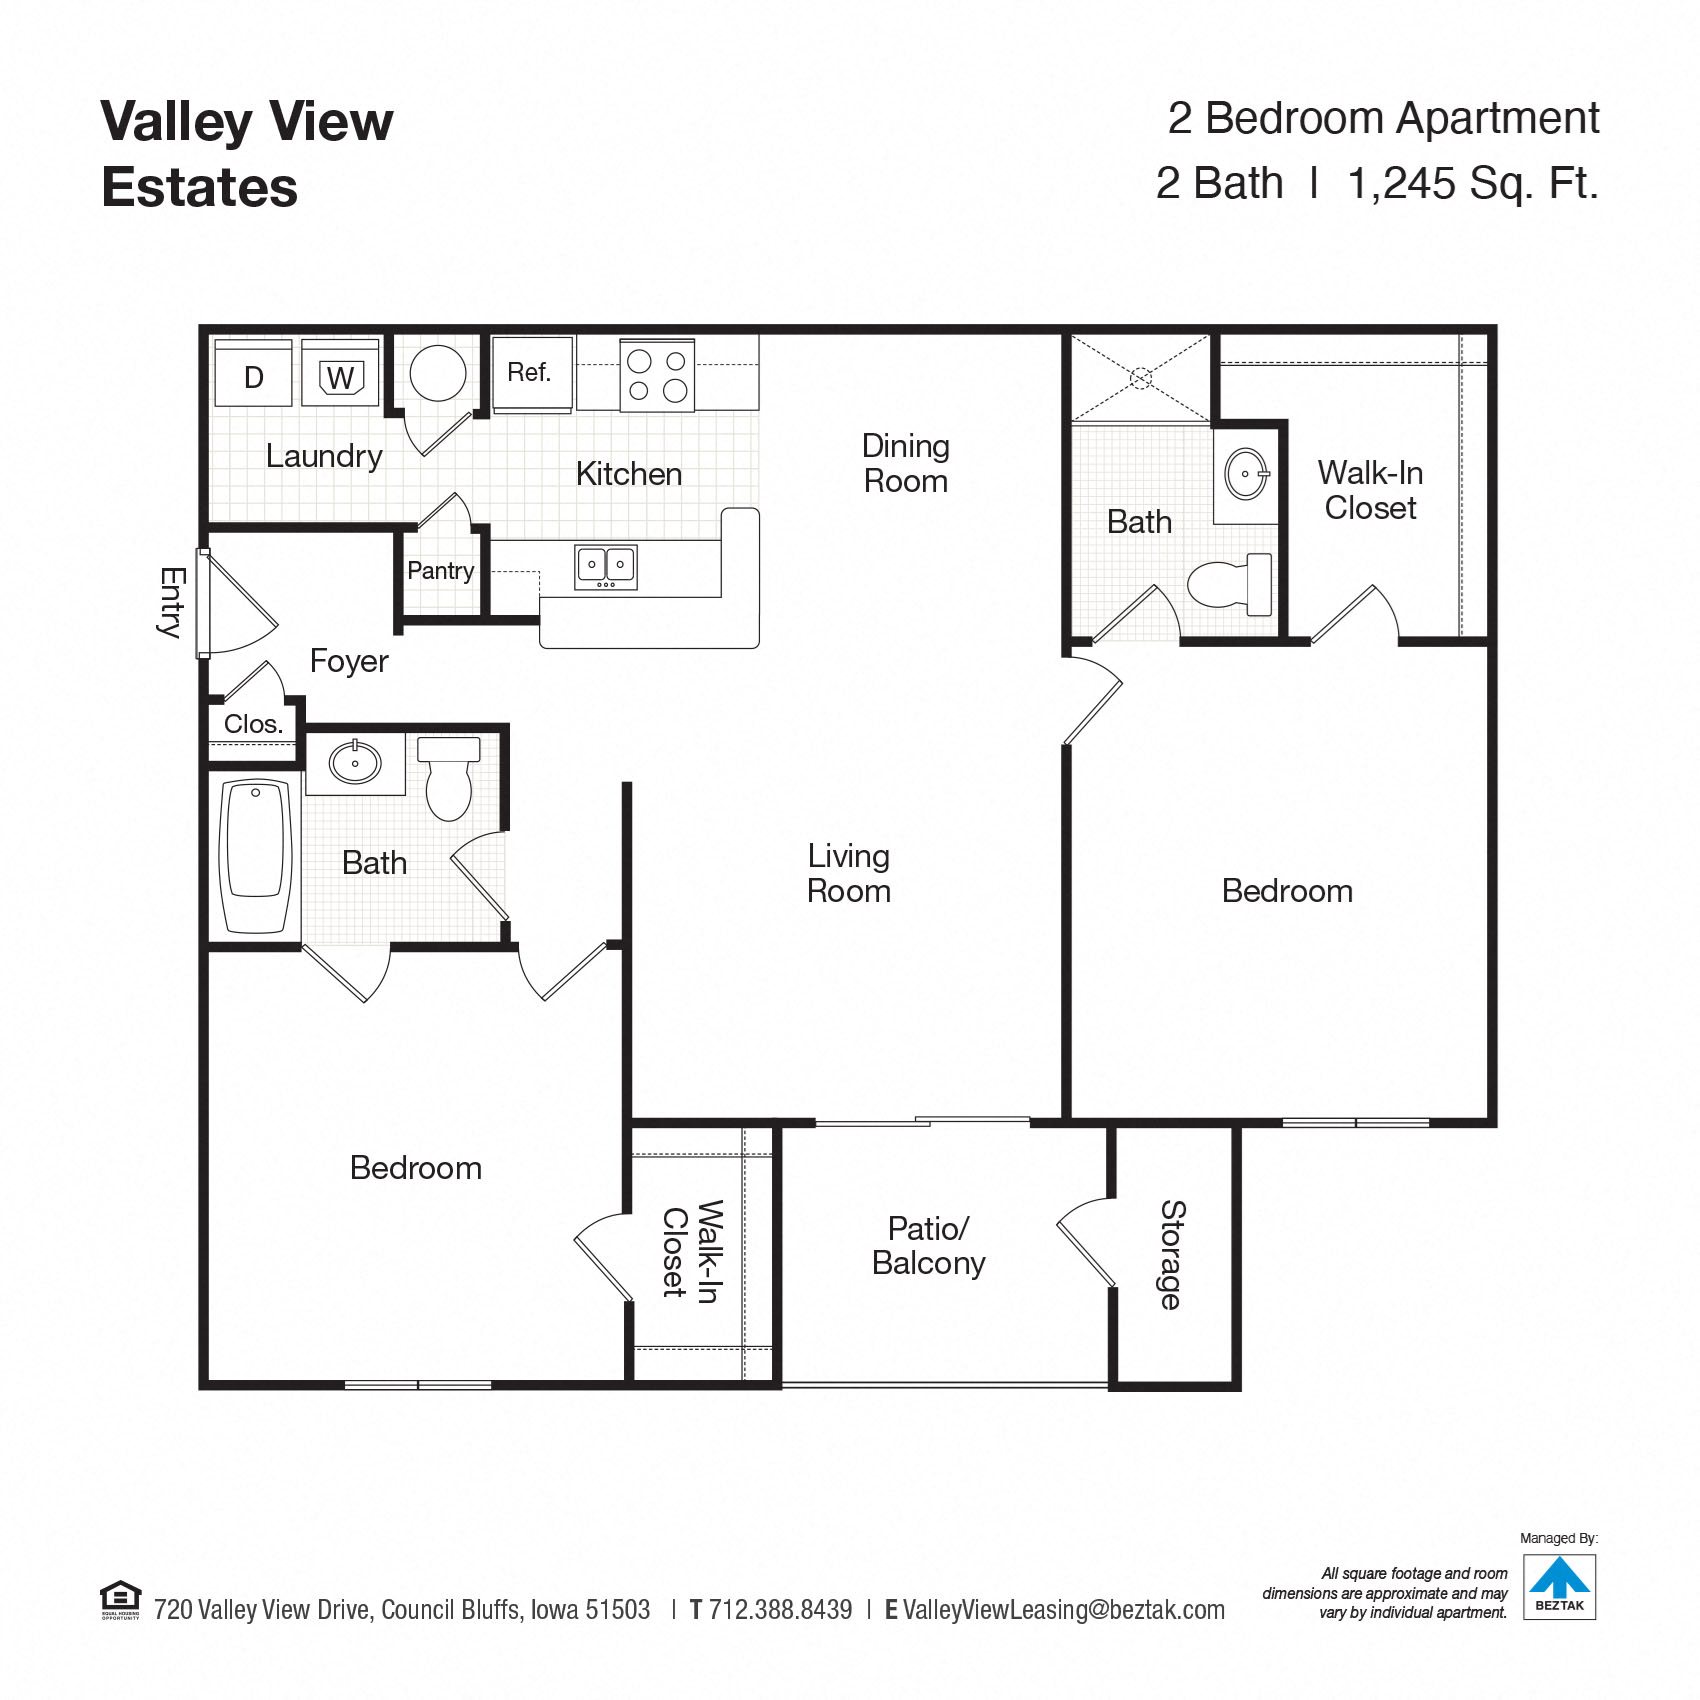 1, 2, 3 Bedroom Apartments in Council Bluffs Valley View